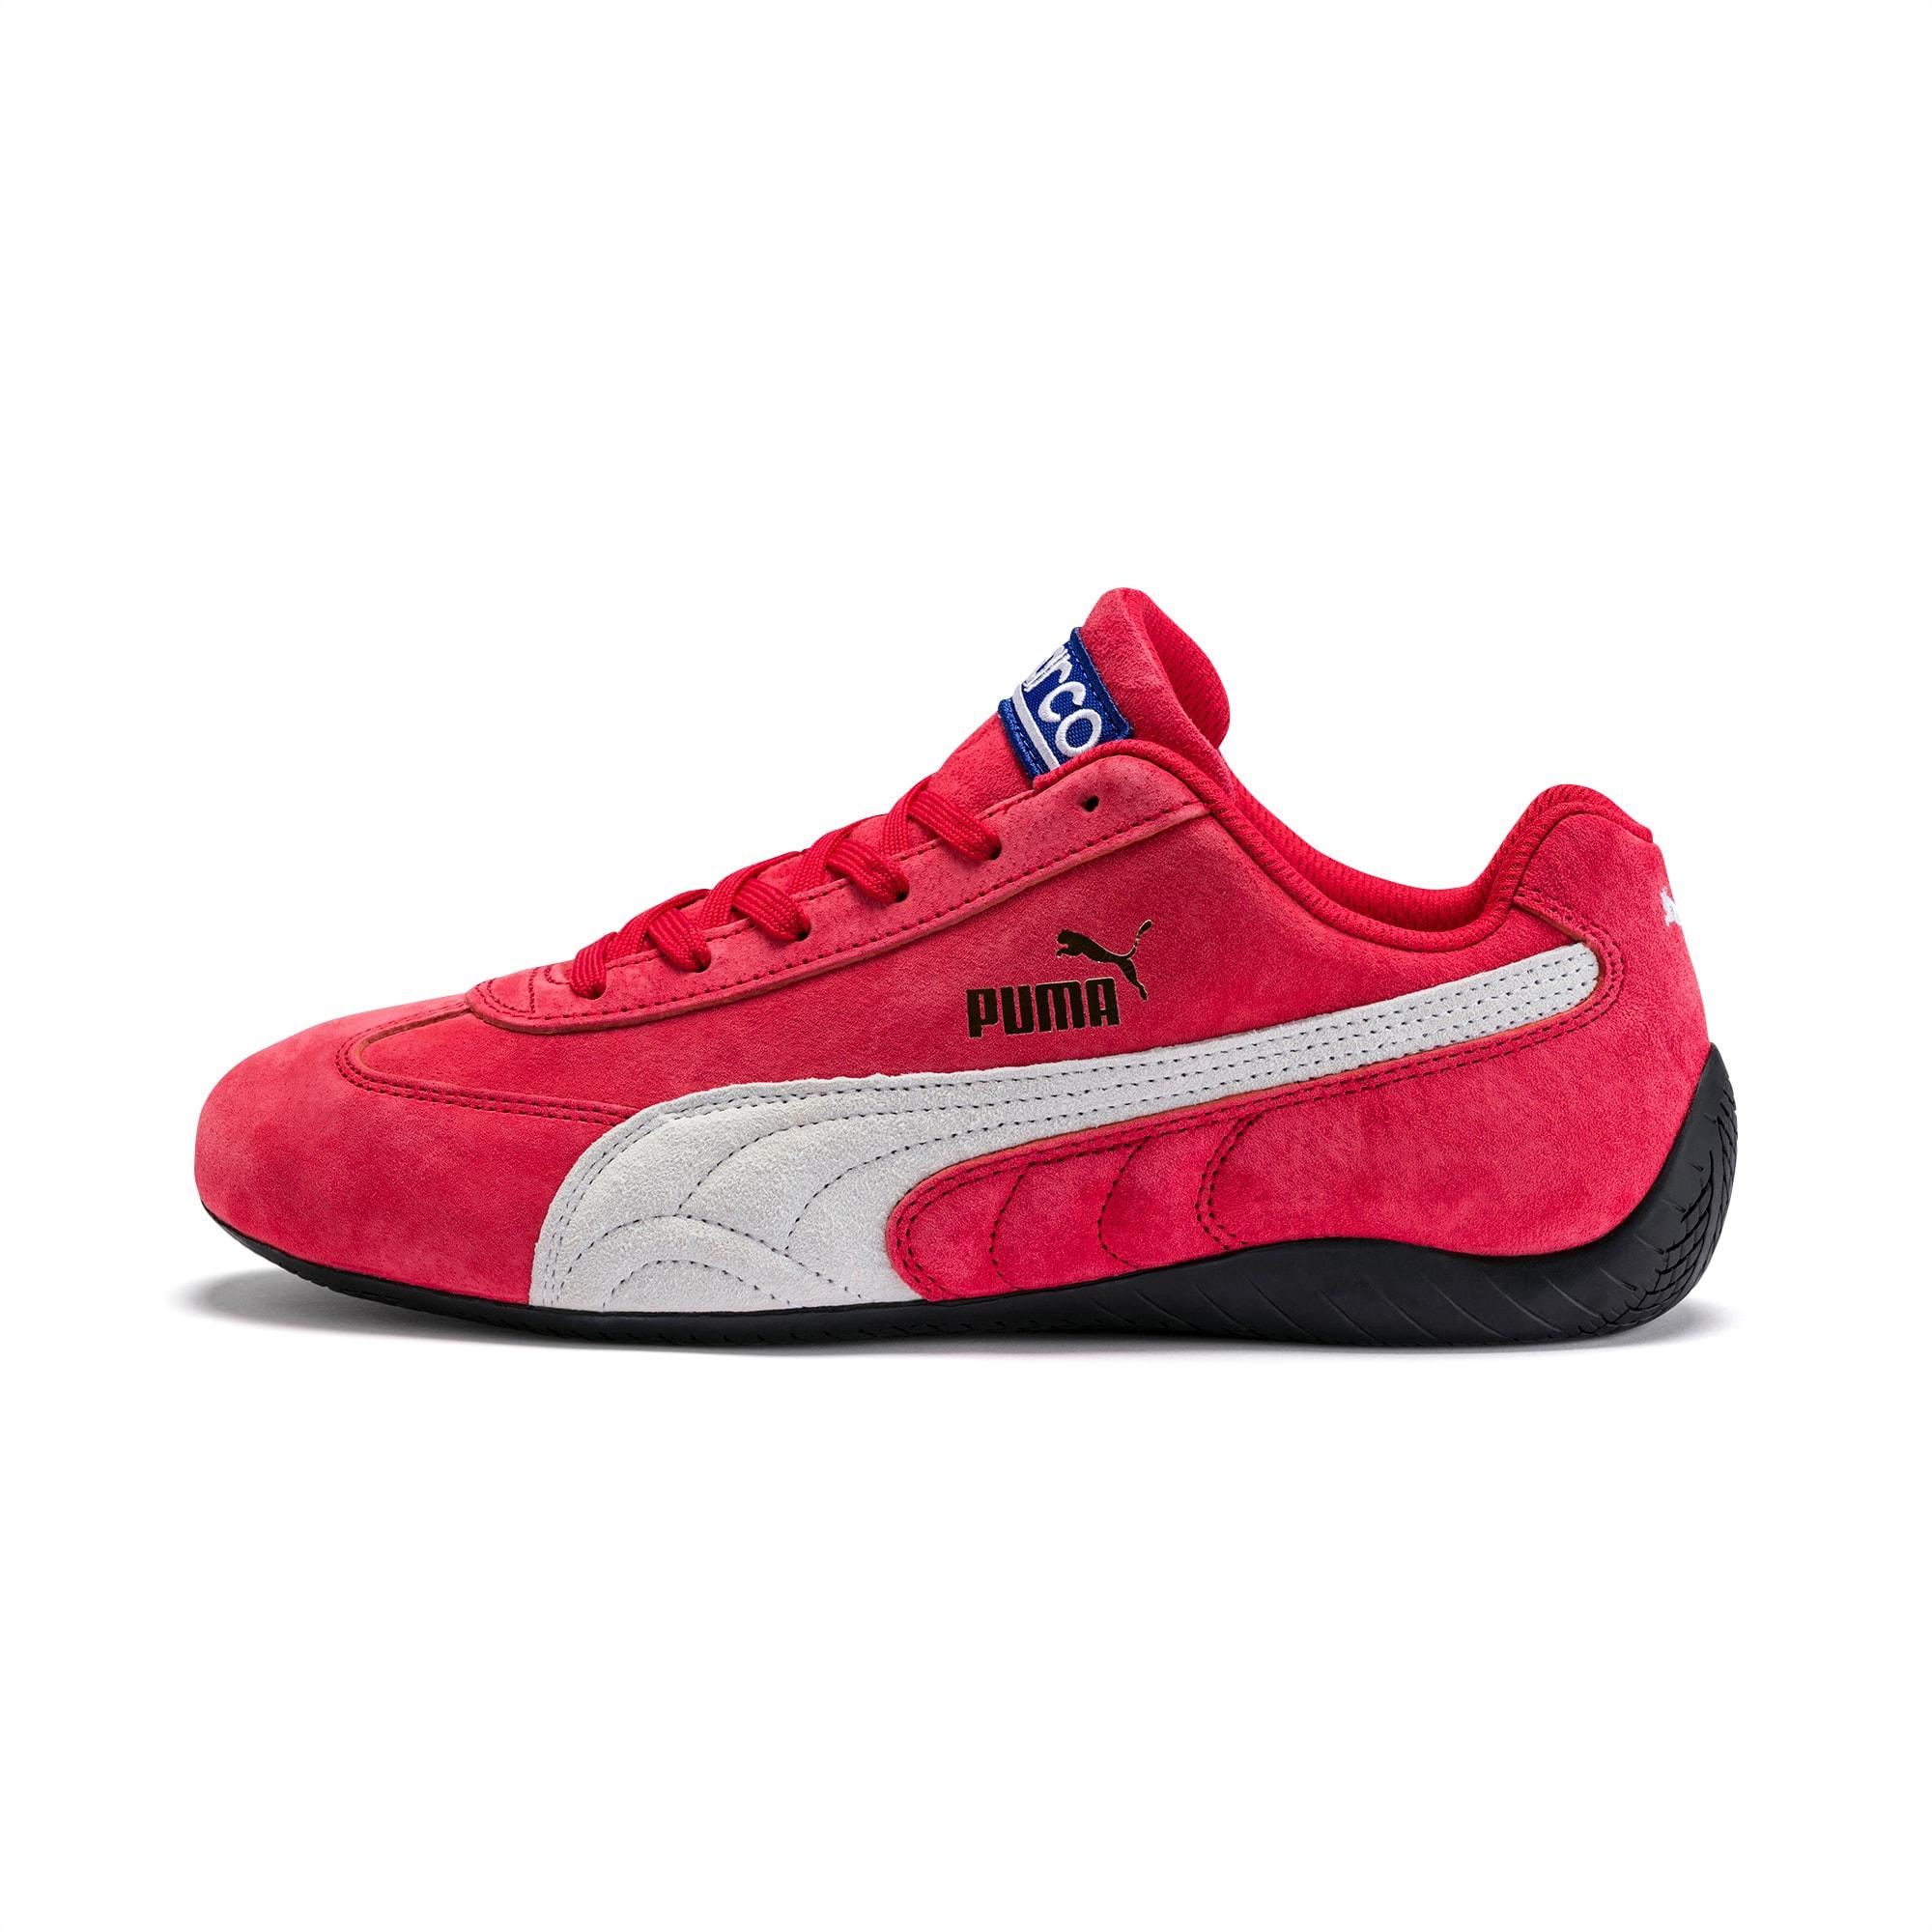 PUMA Suede Speedcat Og Sparco Sneakers in 05 (Red) for Men - Lyst